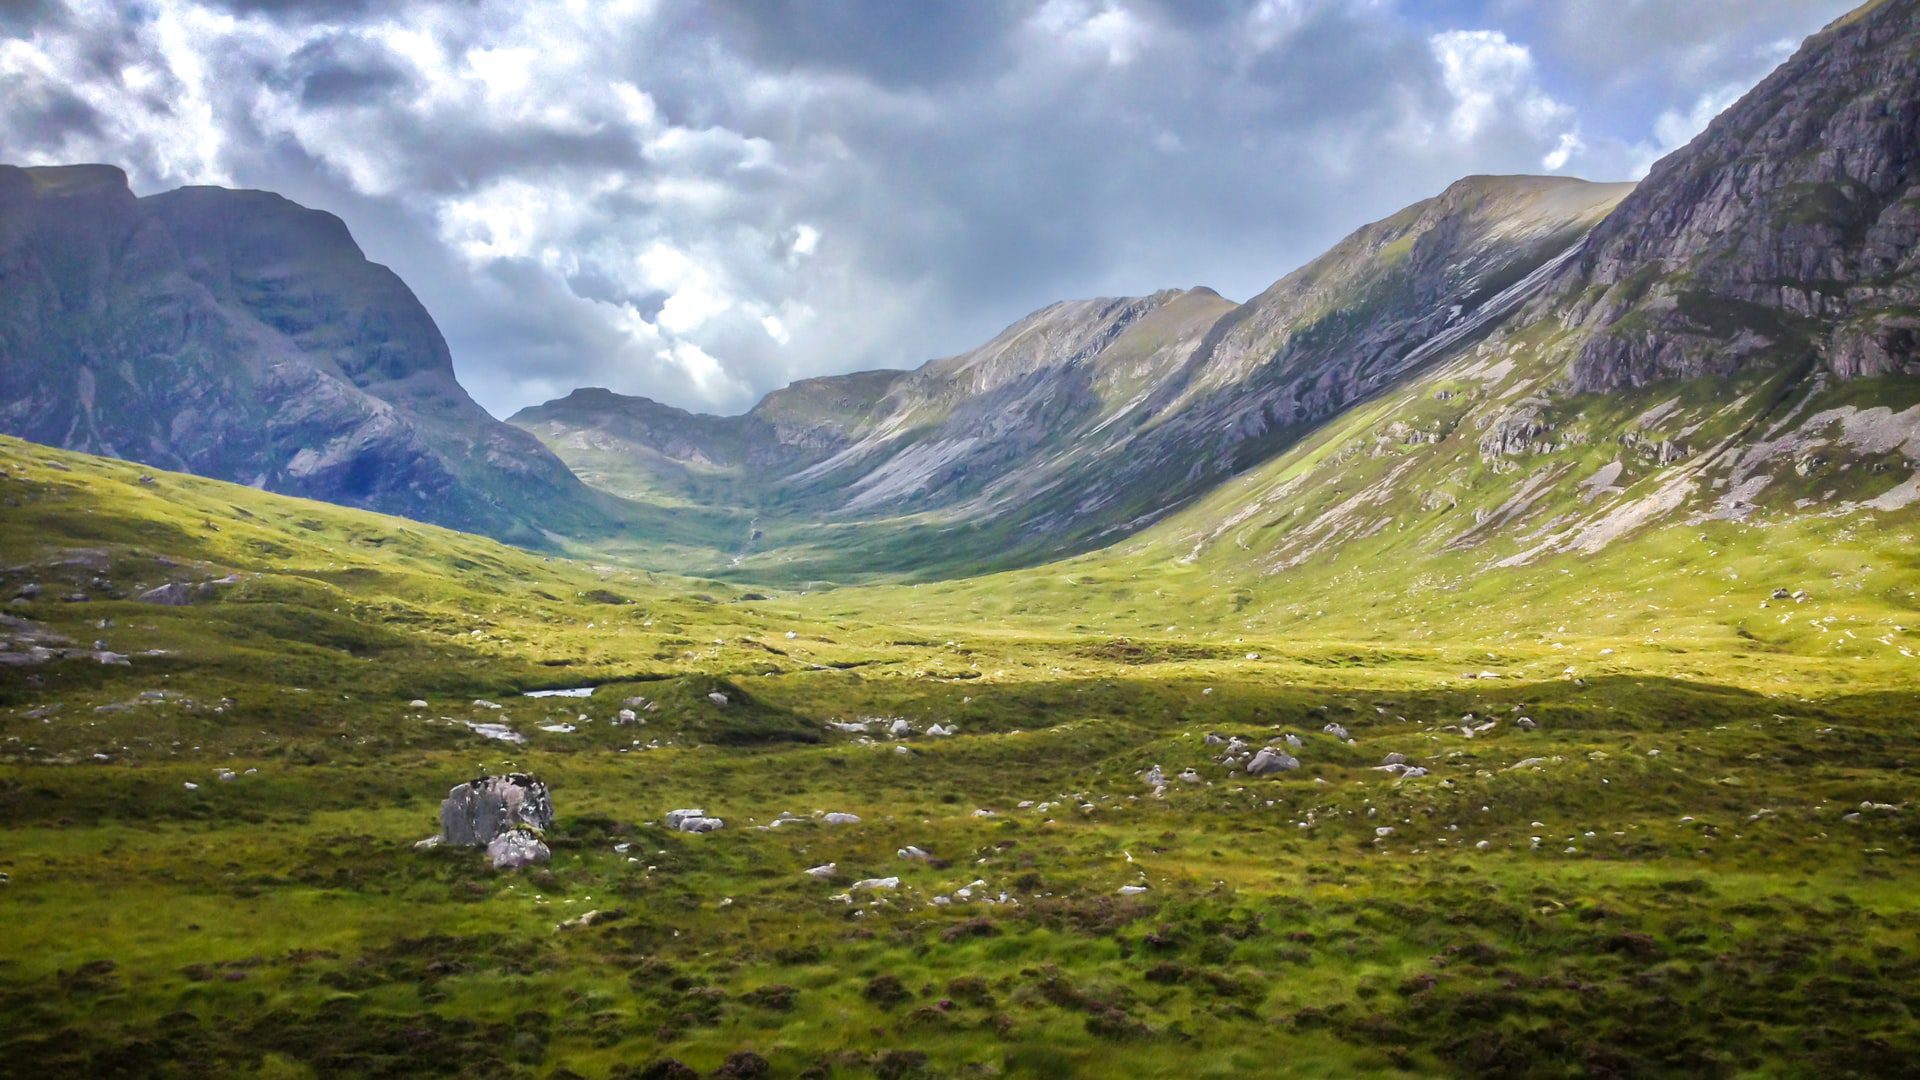 Amazing mountains in Wester ross. The image is photographed from the bottom of the valley looking up at huge, beautiful mountains.